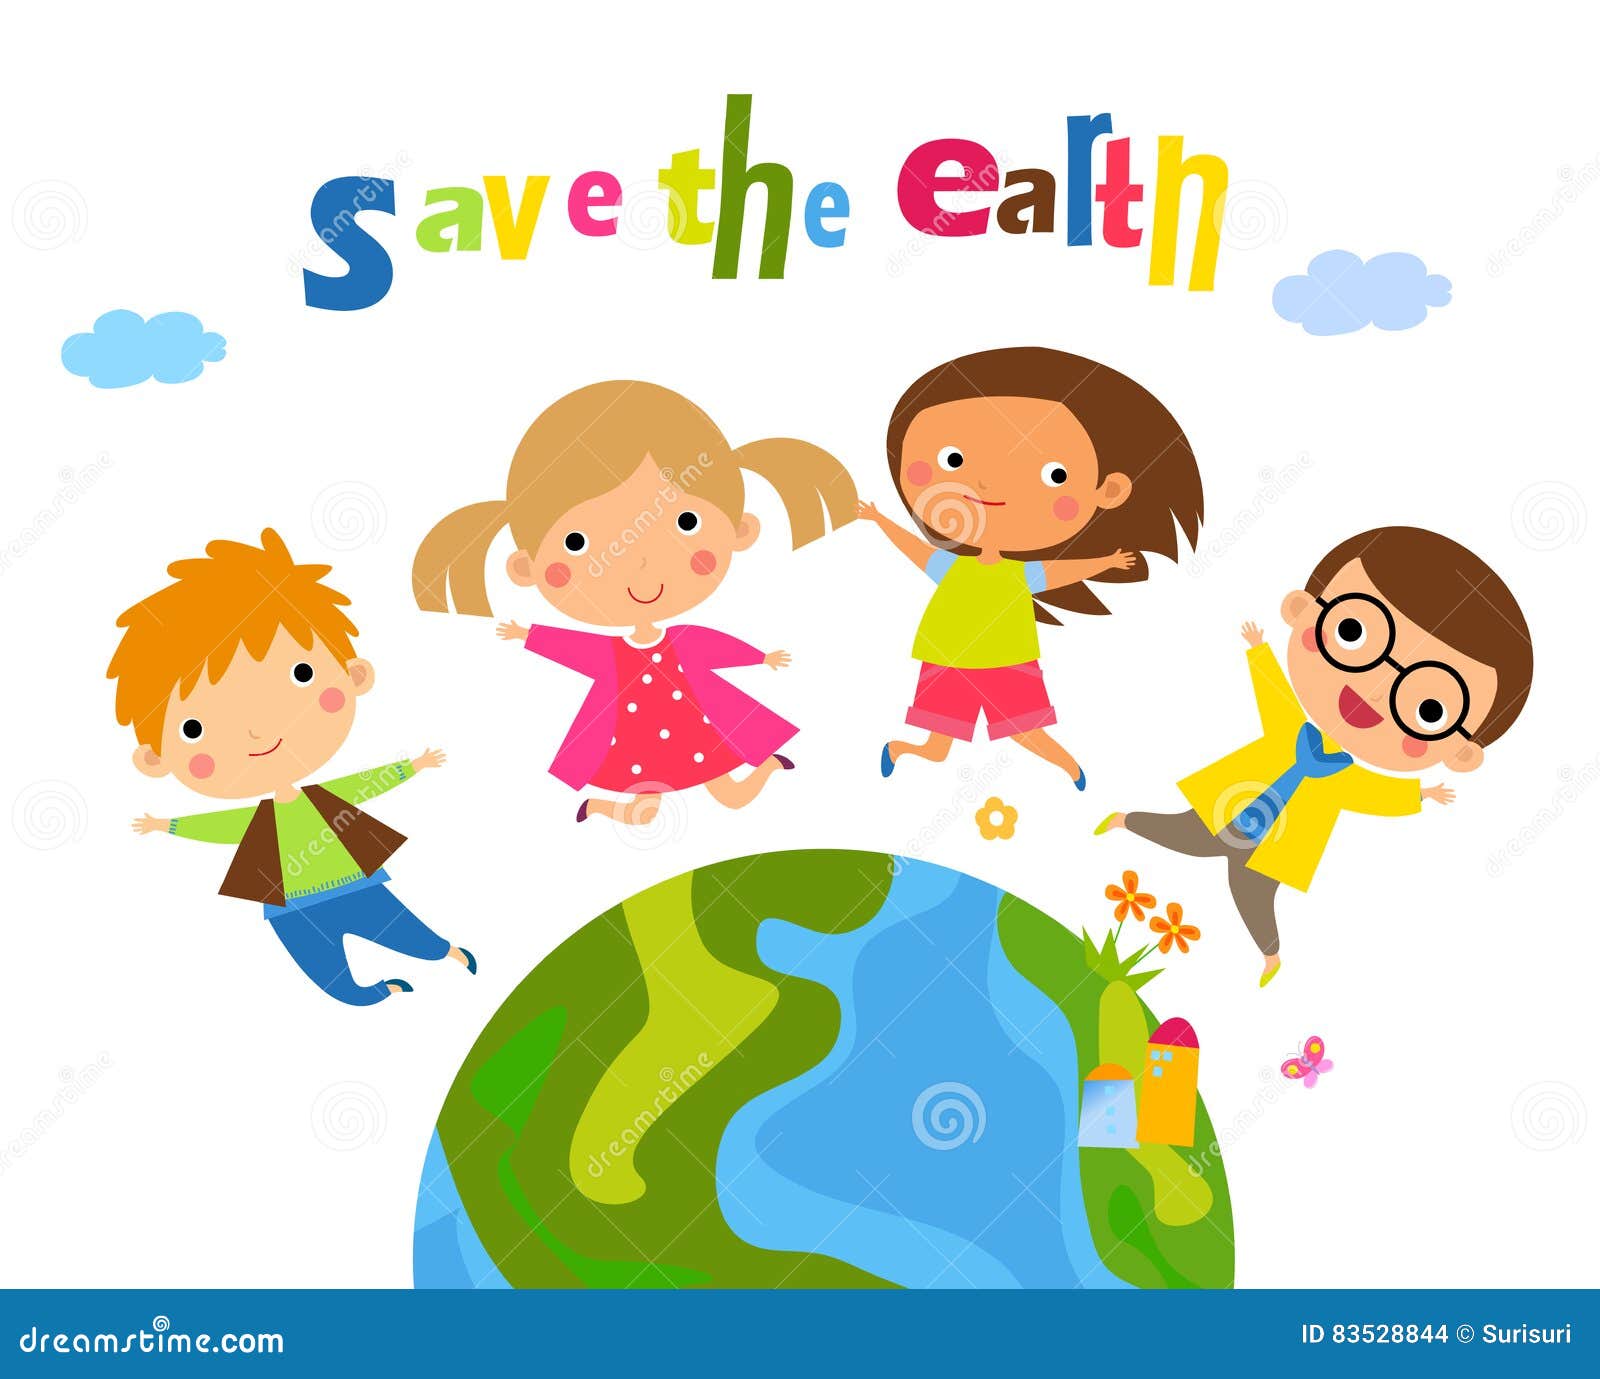 Save the earth stock vector. Illustration of globe, hands - 83528844